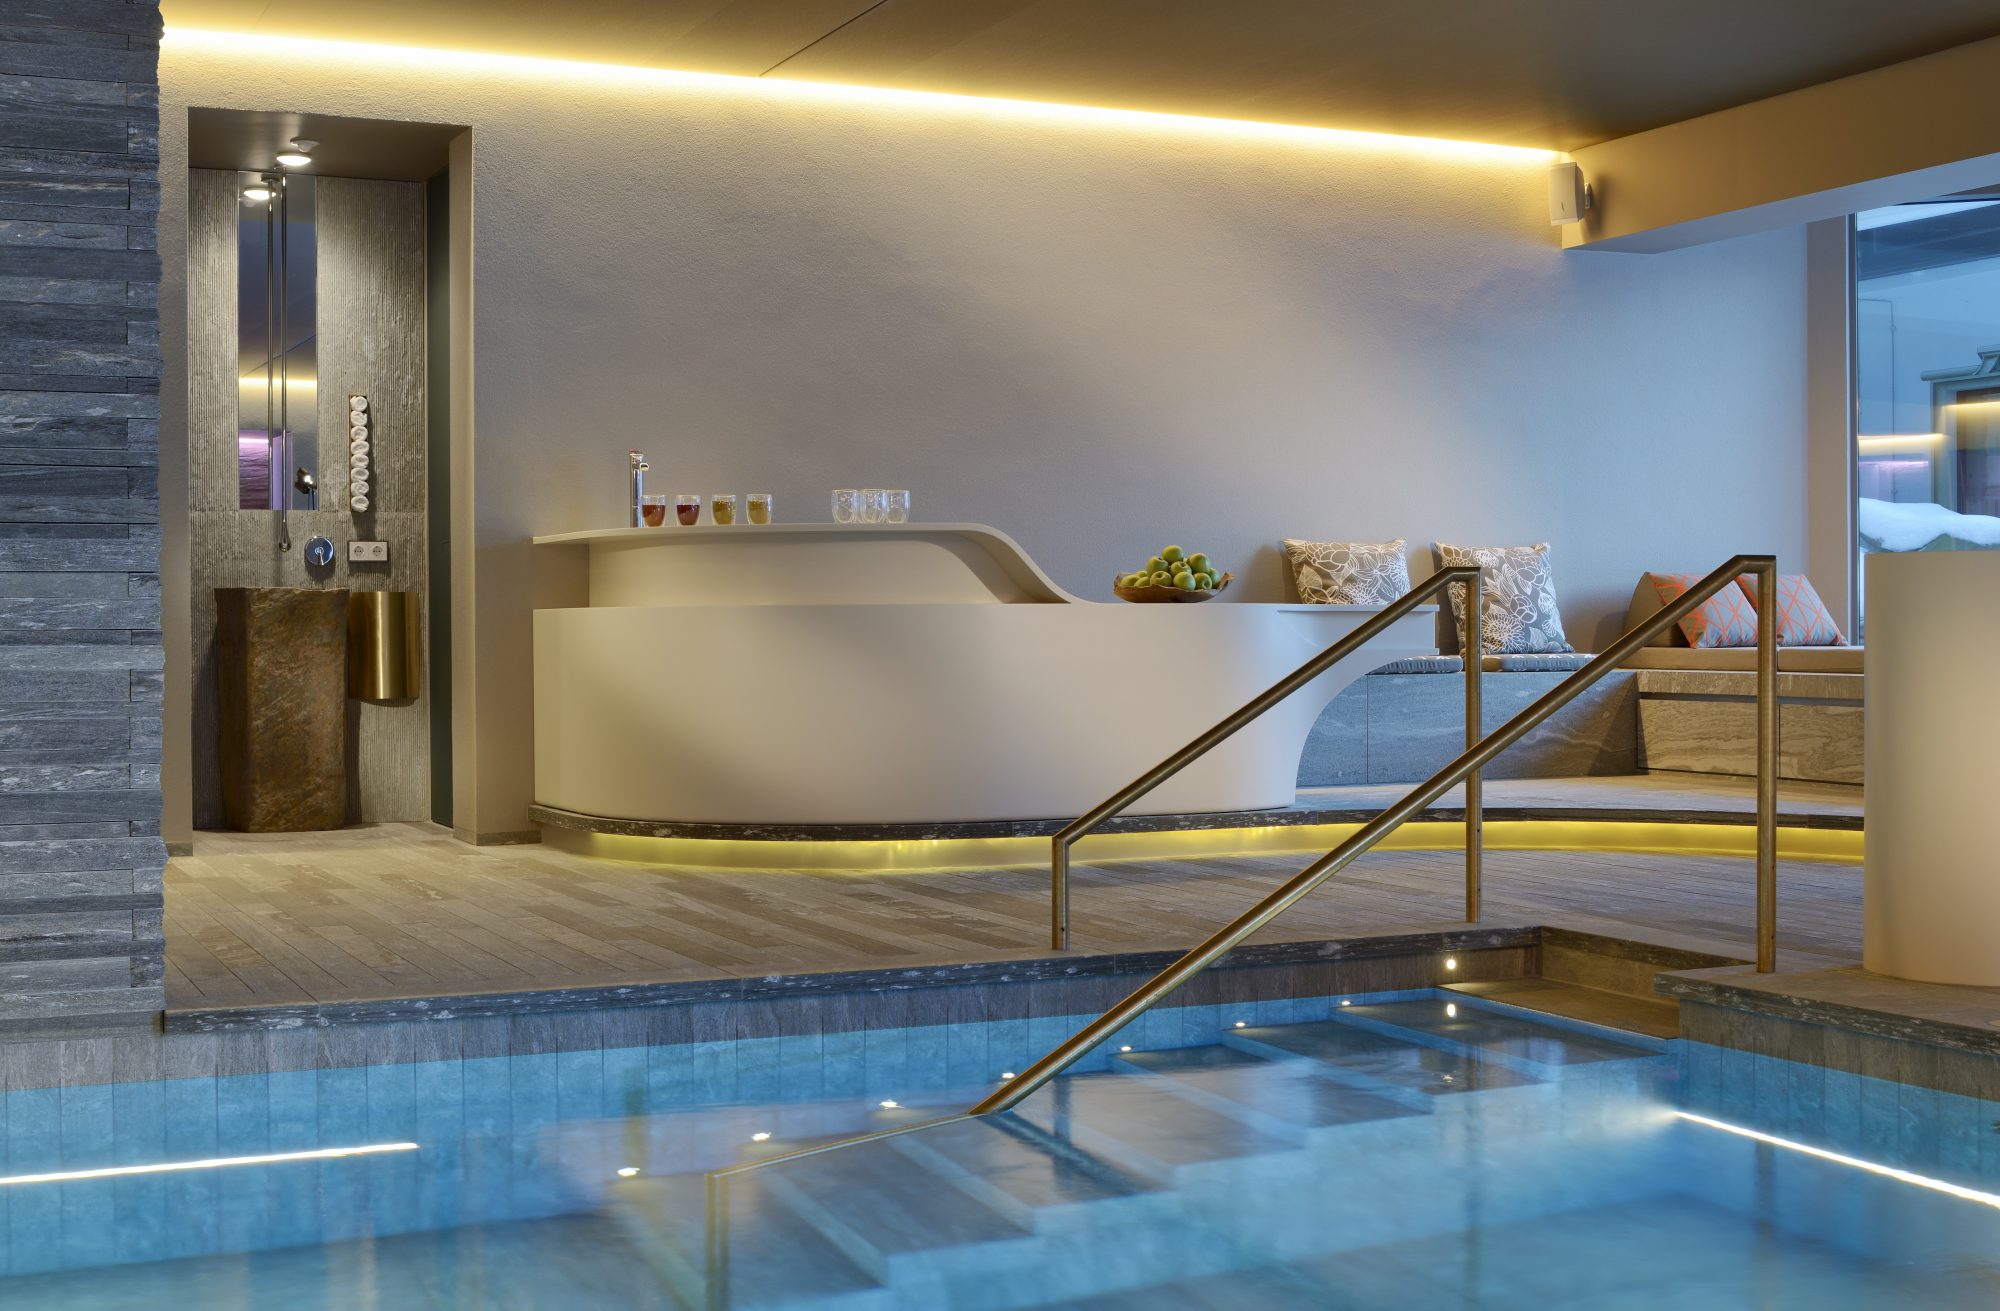 Hotel Arlberg Pool with Teebar - Photo: Hotel Arlberg. The Must-Read Guide to Lech.